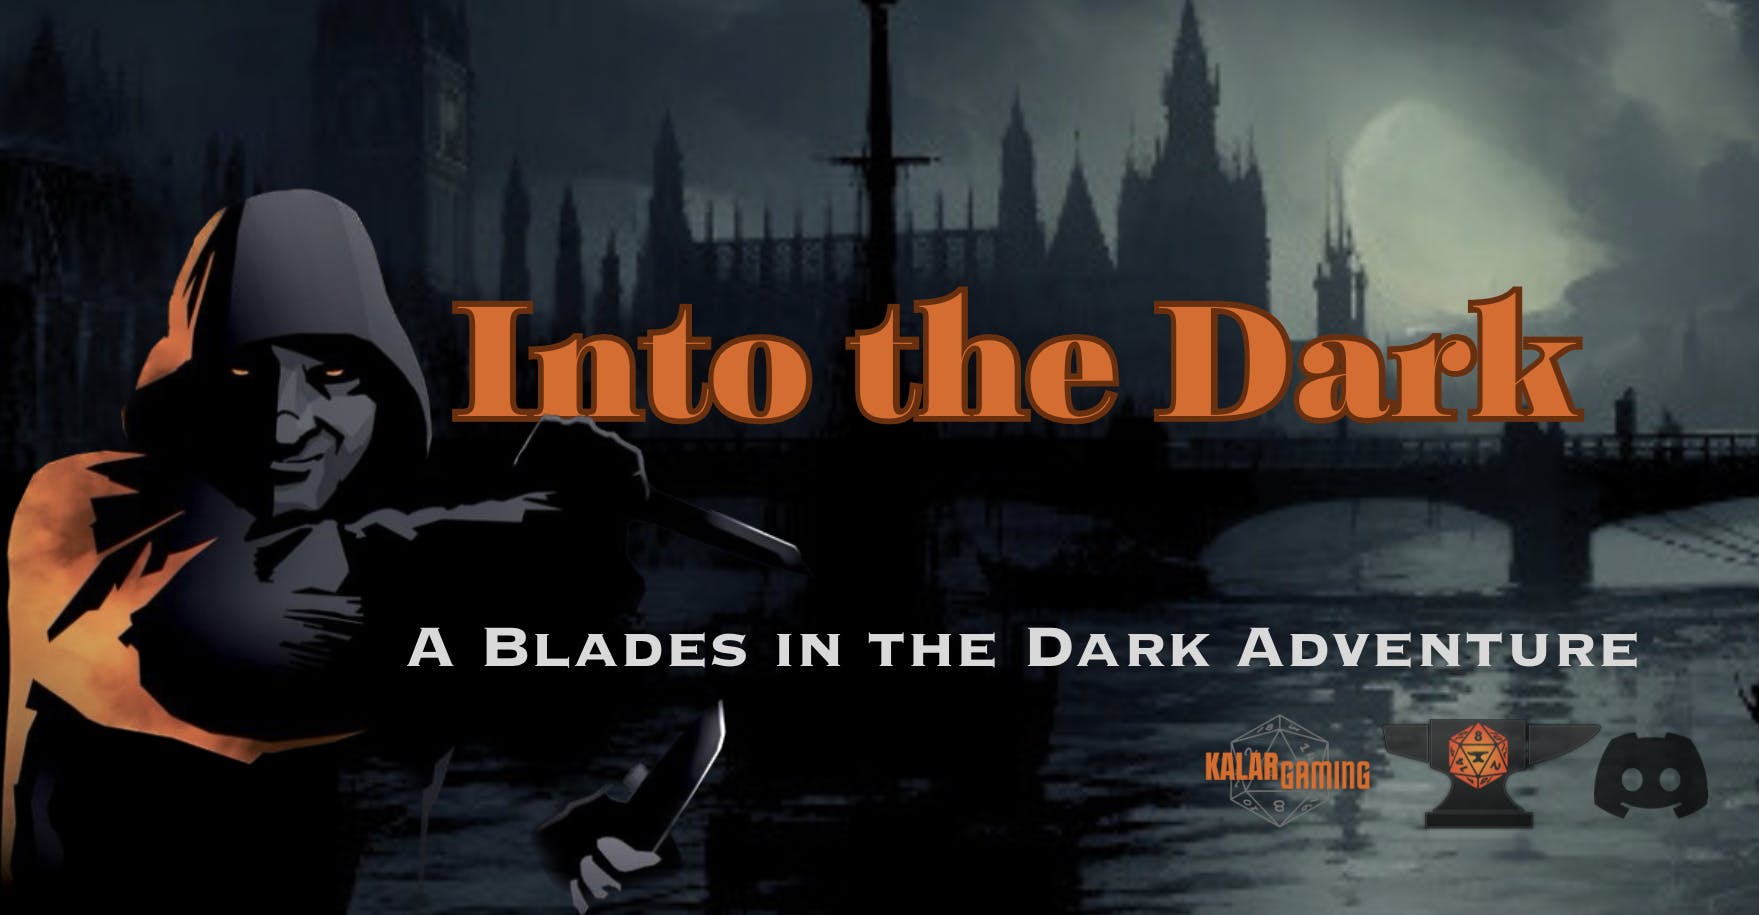 Blades in the Dark - "Into the Dark"  | Beginners - 🏳️‍🌈 - 🏳️‍⚧️ All Welcome